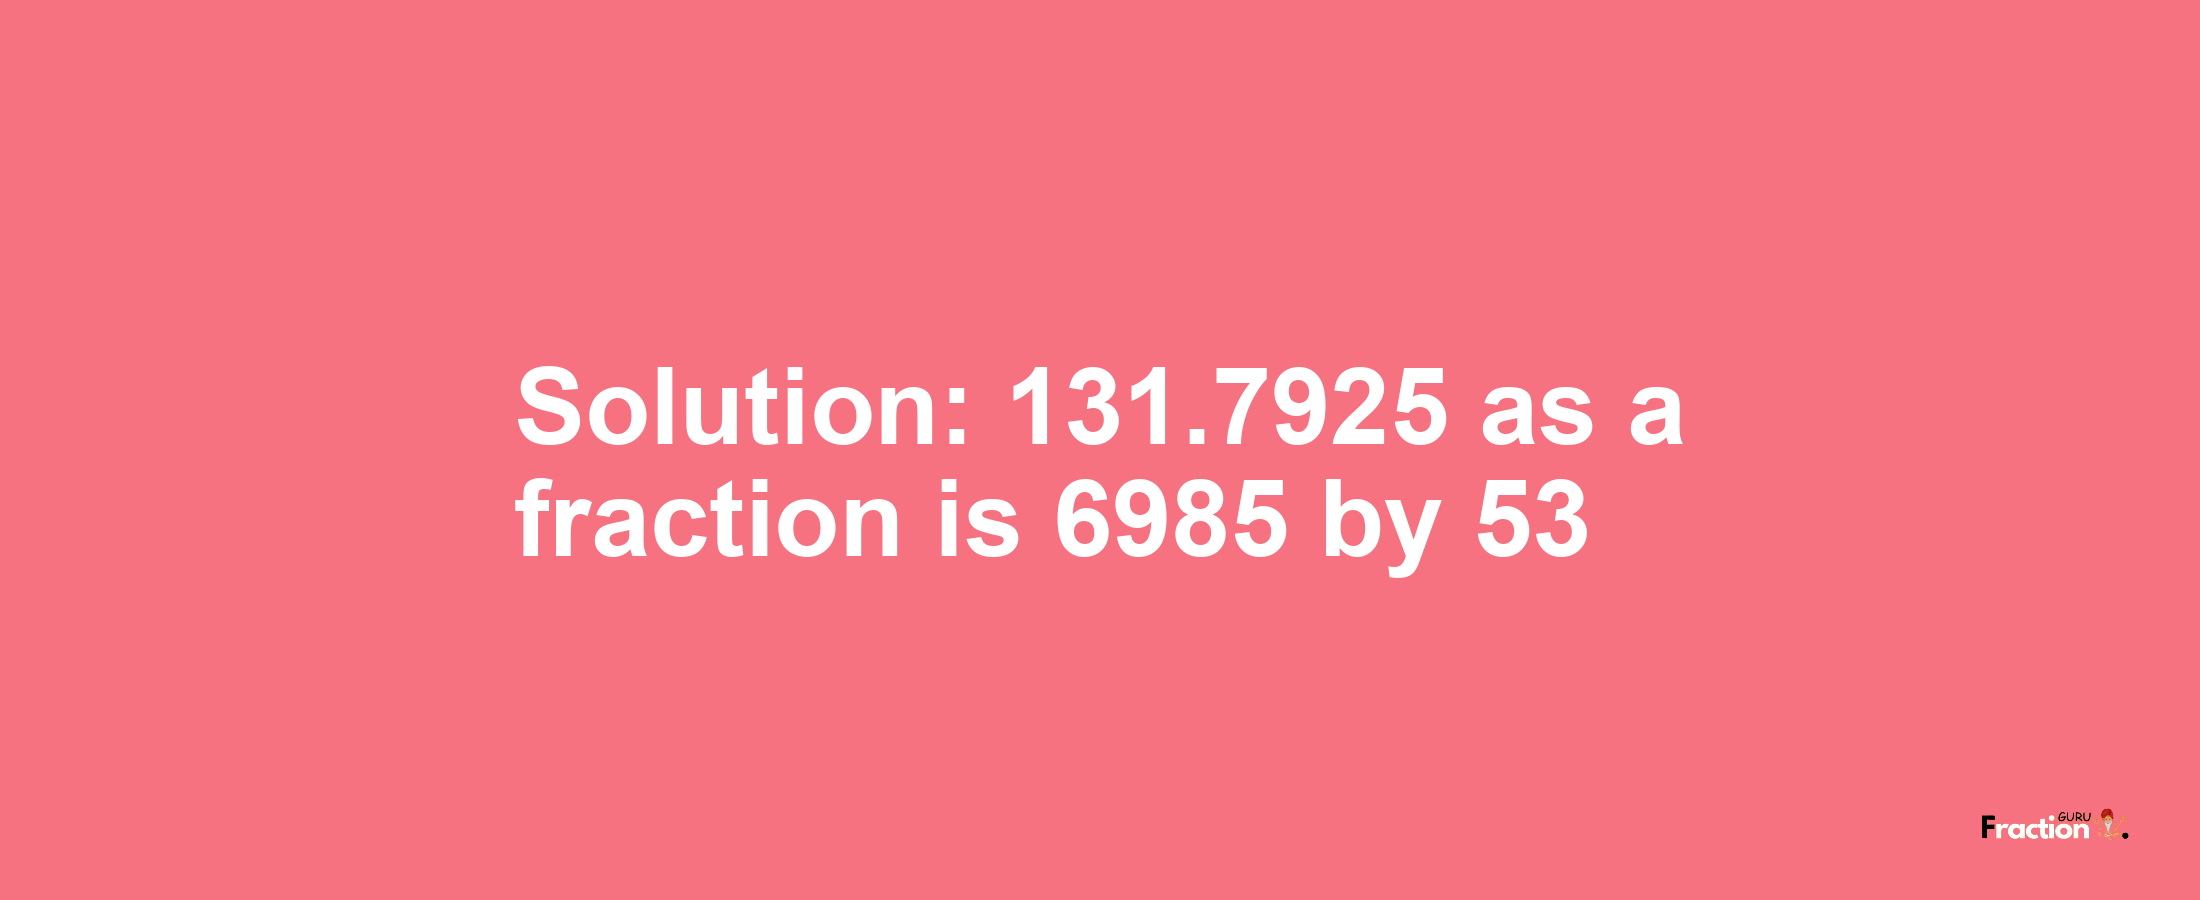 Solution:131.7925 as a fraction is 6985/53